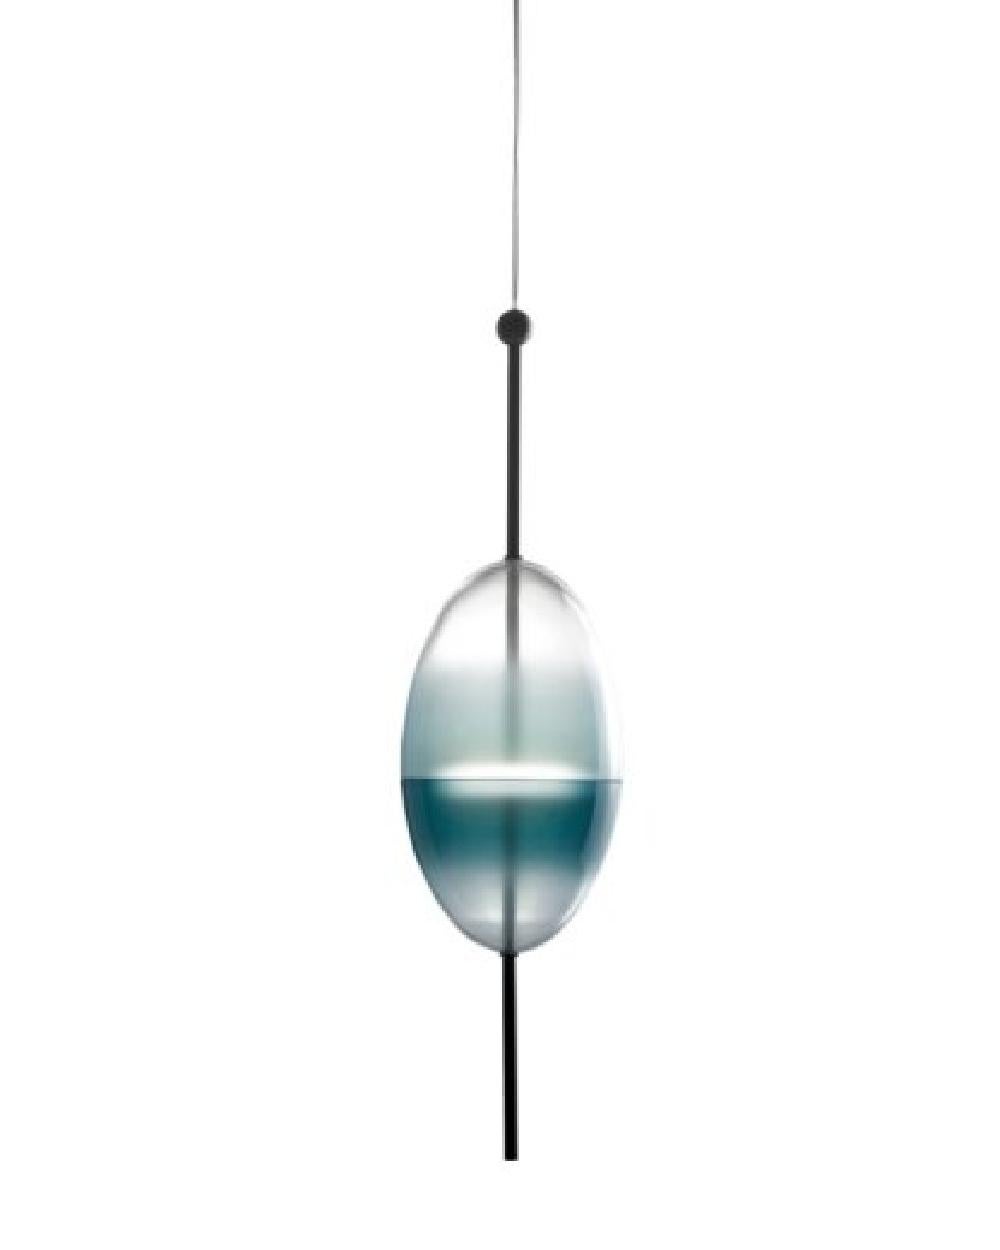 Italian FLOW[T] S1 Pendant lamp in Turquoise by Nao Tamura for Wonderglass For Sale